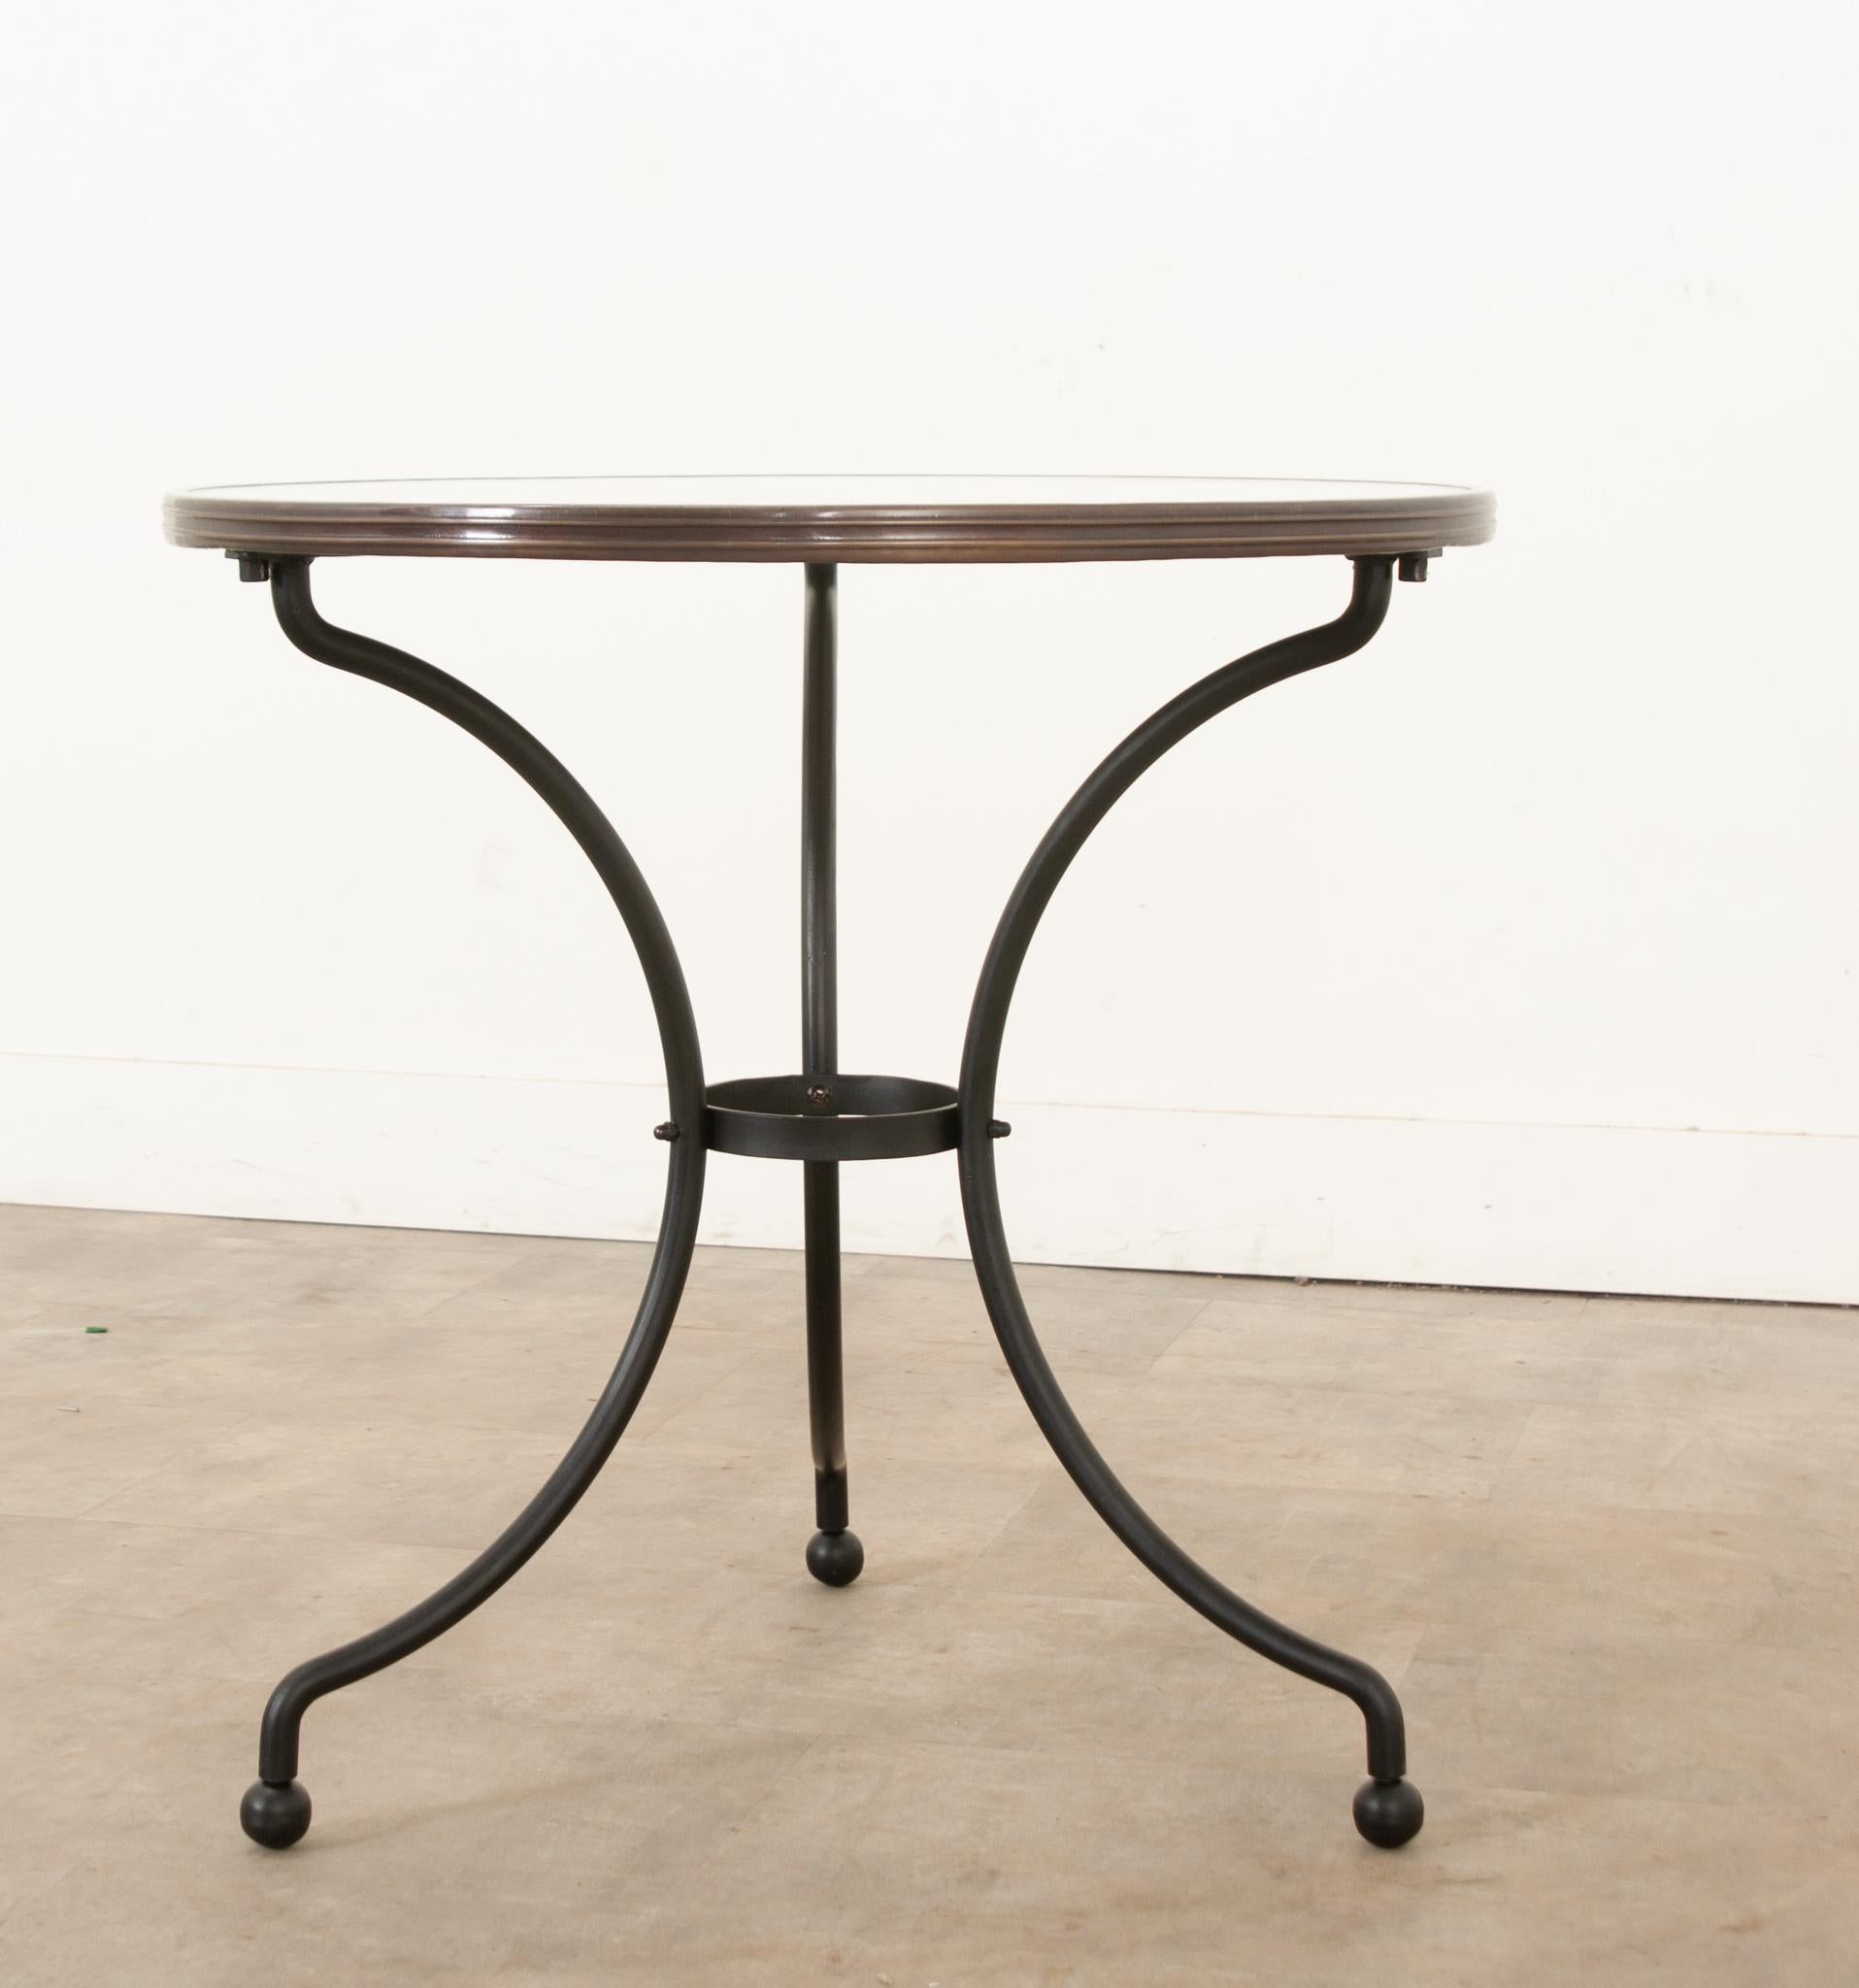 A classic Parisian style marble top & iron bistro table. A unique white marble top is banded by an antiqued brass trim. The base is classic in design, with 3 legs secured by a stretcher constructed out of cast iron. There are 3 steel prongs under